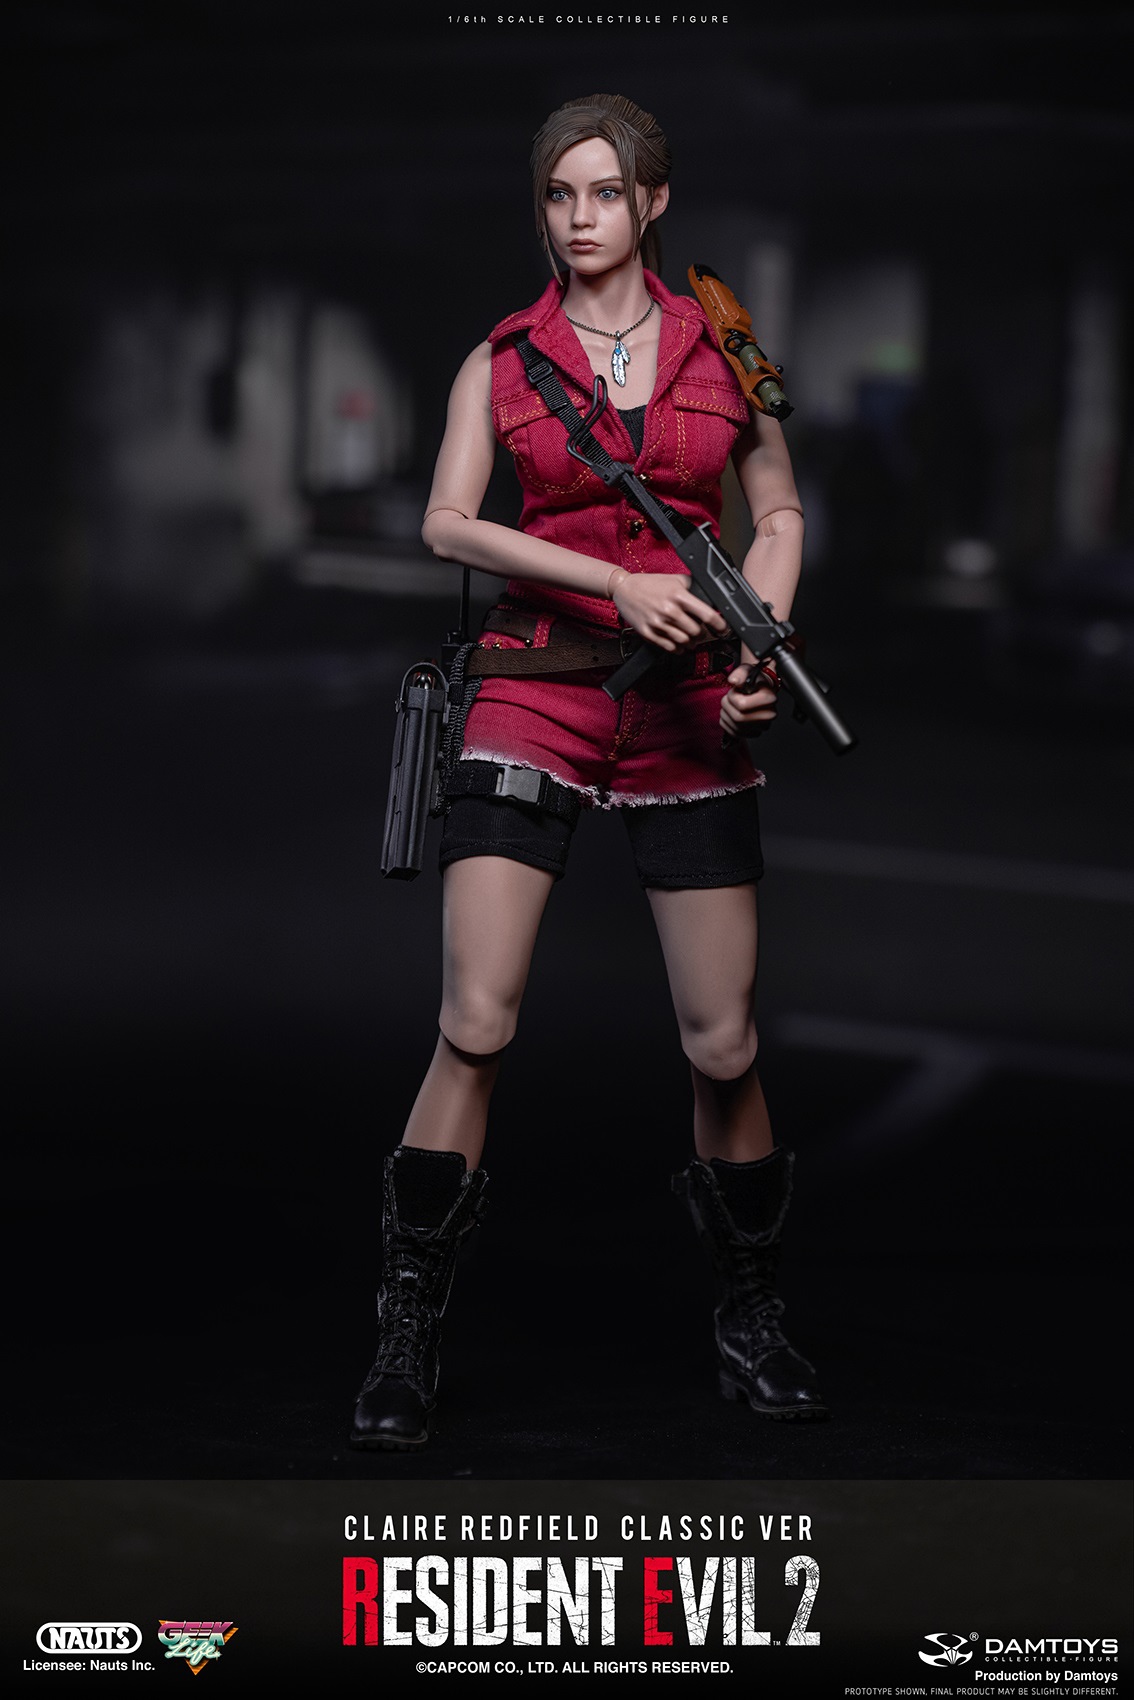 DAMTOYS DMS031 Claire Redfield Resident Evil 2 1/6 Action Figure